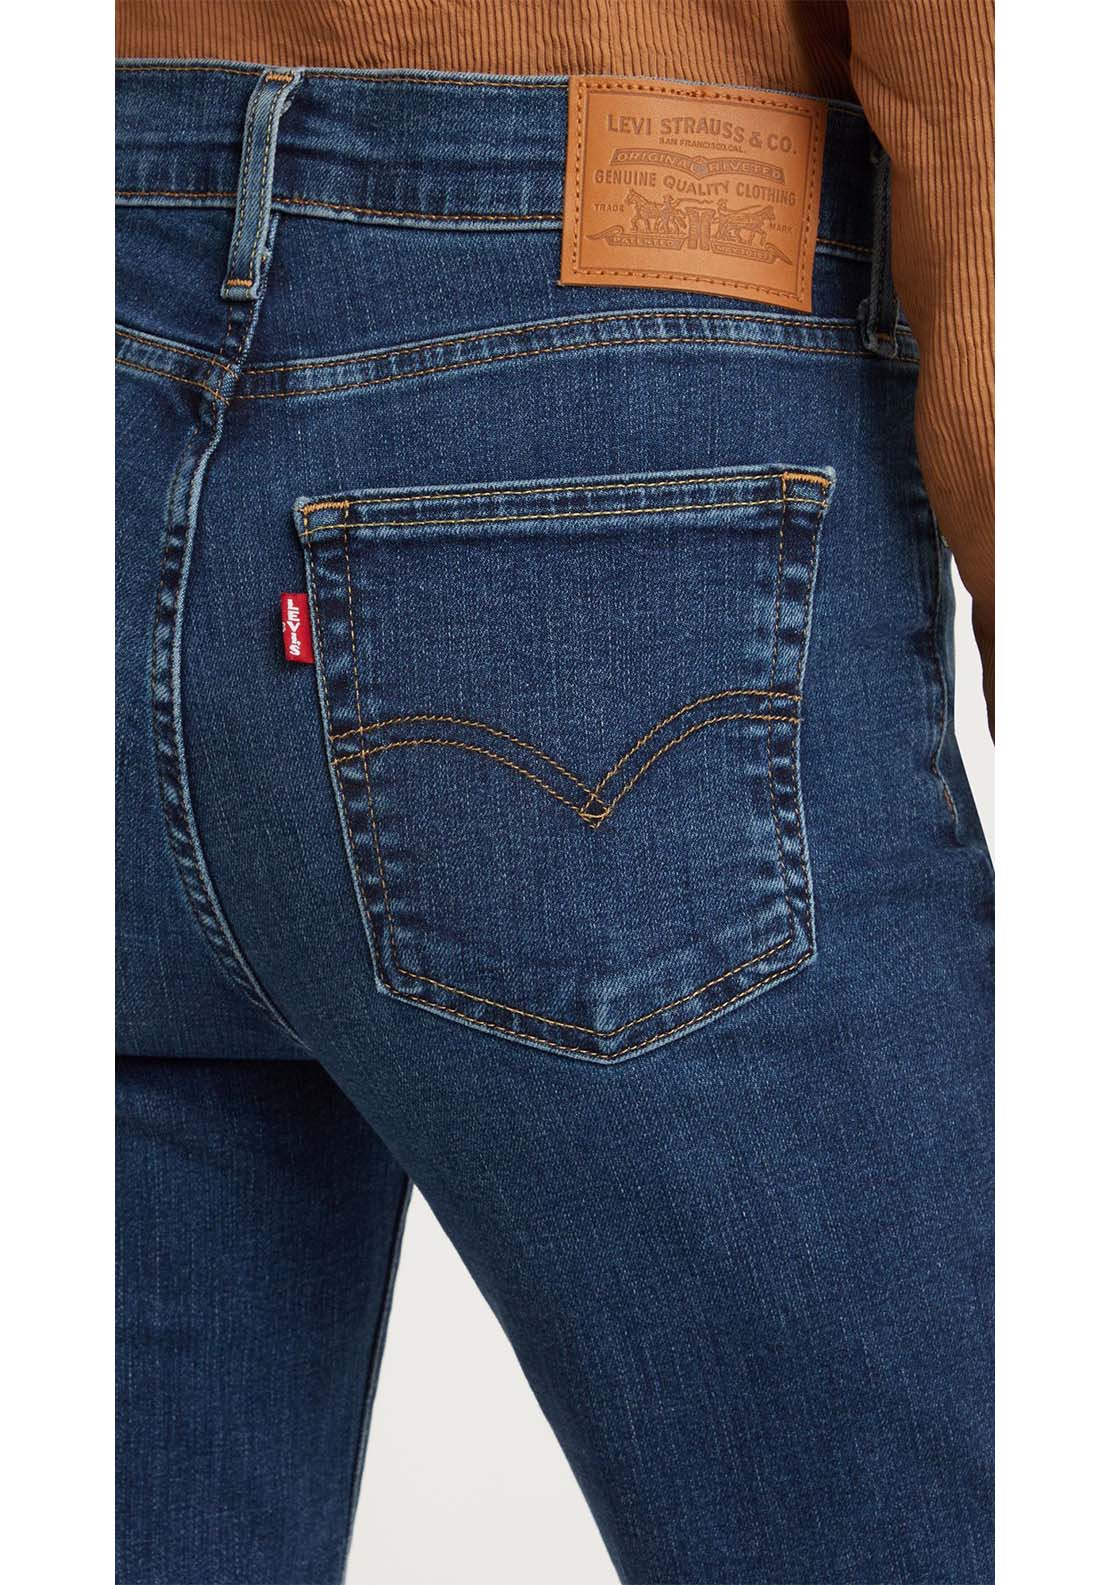 Levis 724 High Rise Straight 5 Shaws Department Stores